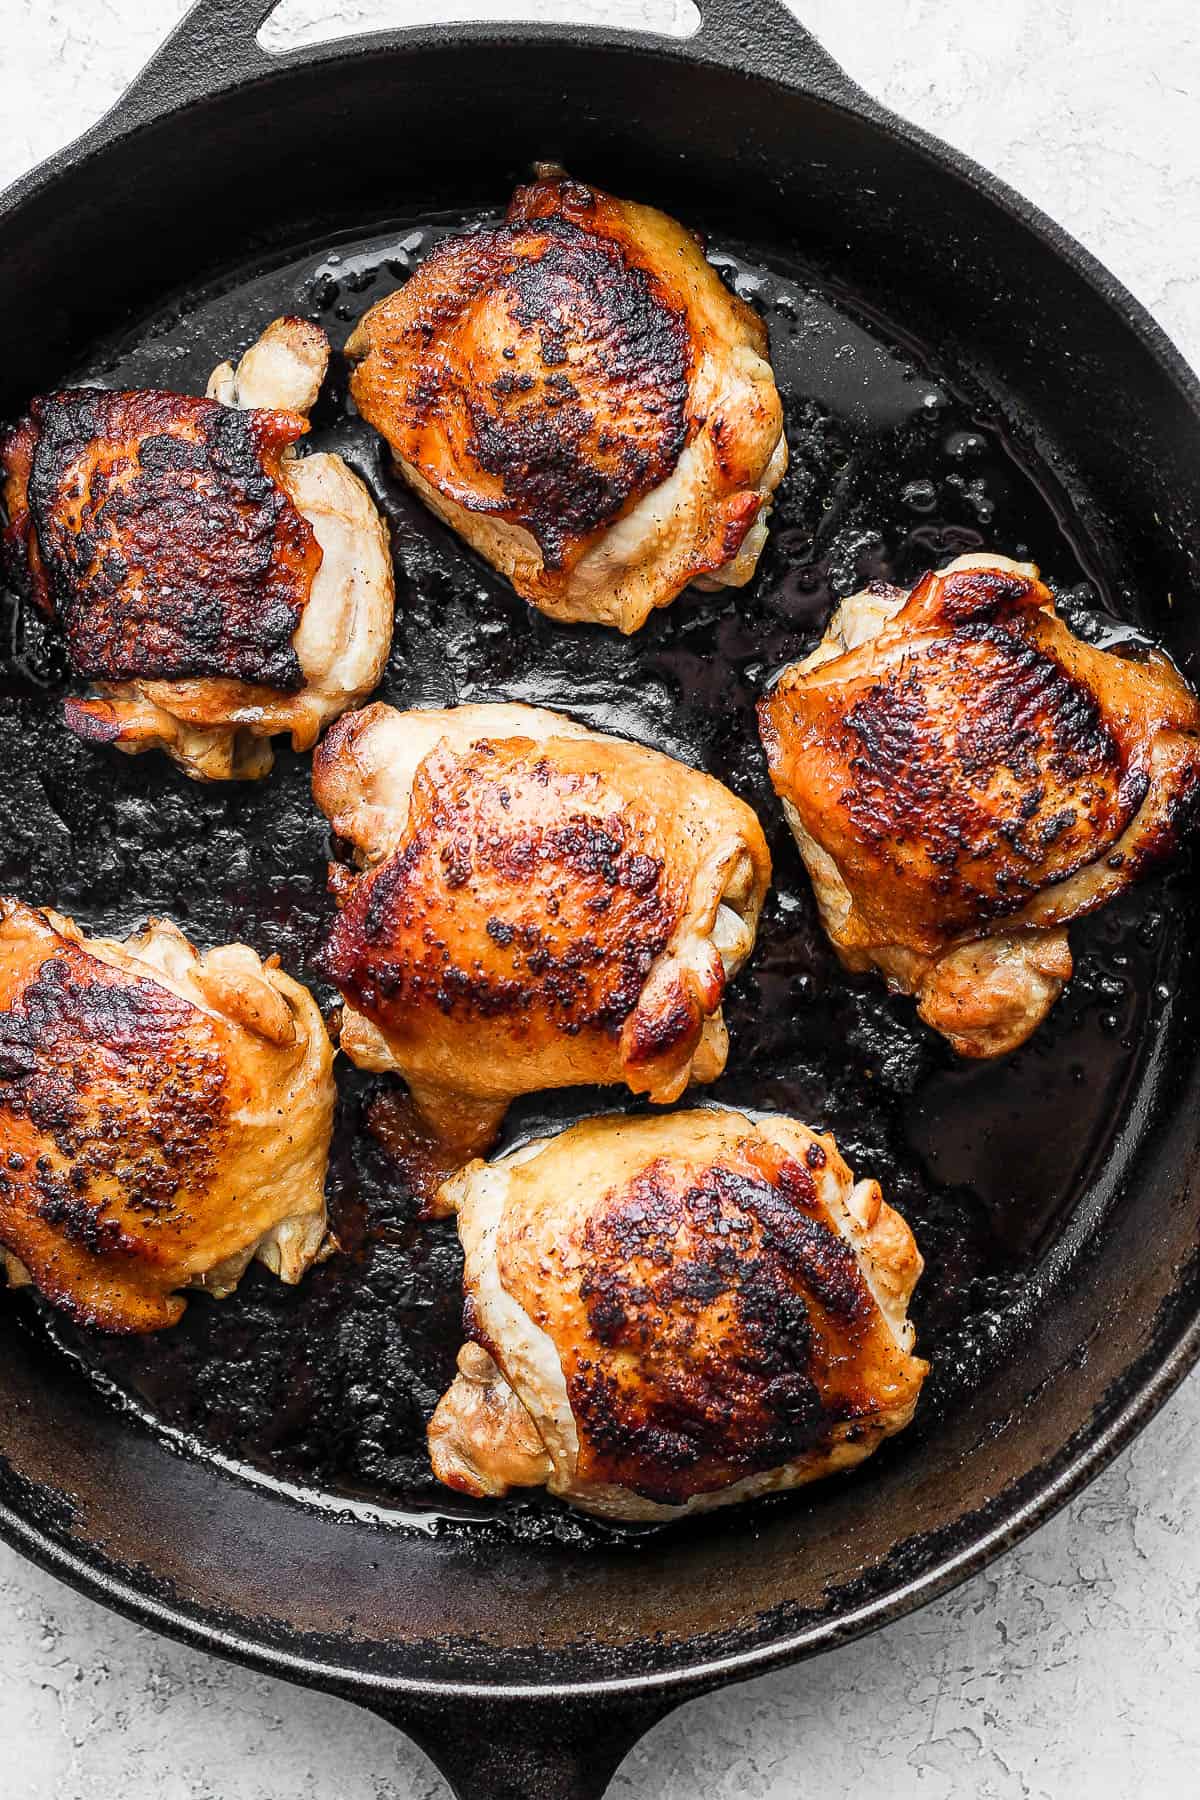 6 chicken thighs fully cooked in a cast iron skillet.